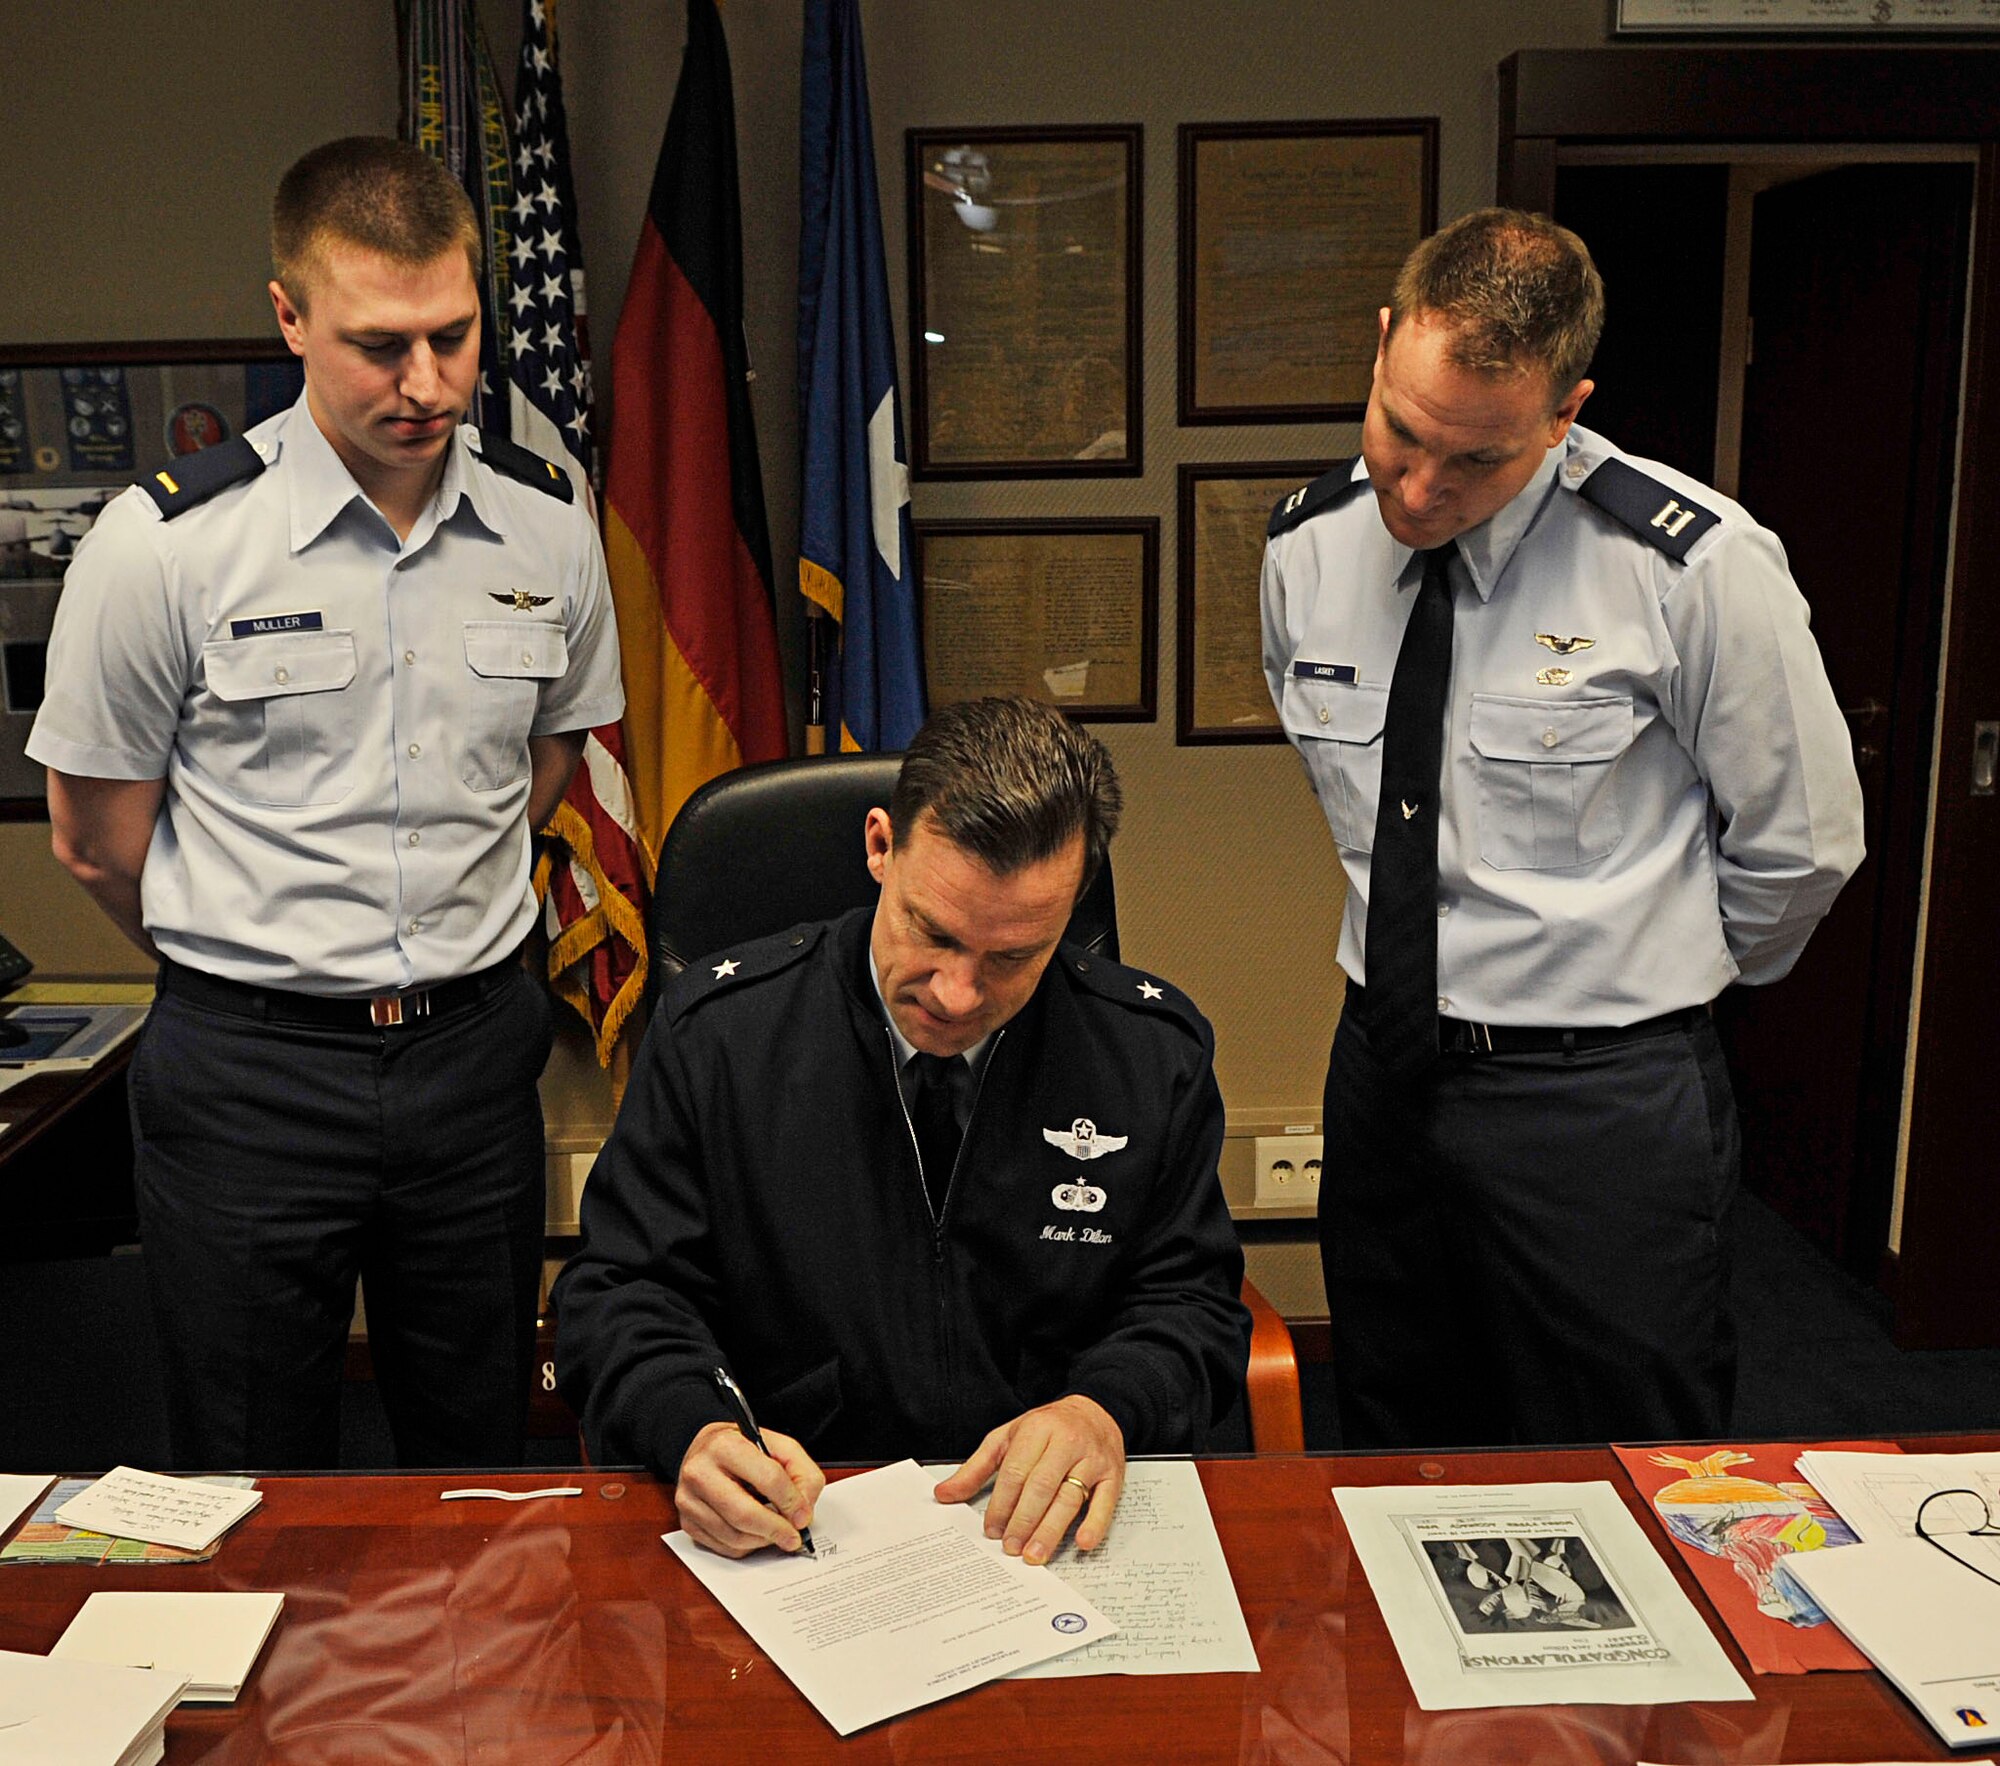 U.S. Air Force Brig. Gen. Mark Dillon, 86th Airlift Wing commander, signs the Air Force Assistance Fund contribution form, while 2nd Lt. Mark Muller, 86th Communications Squadron and Capt. Donavan Laskey, 37th Airlift Squadron, observe, Ramstein Air Base, Germany, Feb. 7, 2011. The AFAF provides each and every Airman the opportunity to directly impact the lives of individuals through charitable donations. (U.S. Air Force photo by Airman 1st Class Desiree Esposito)